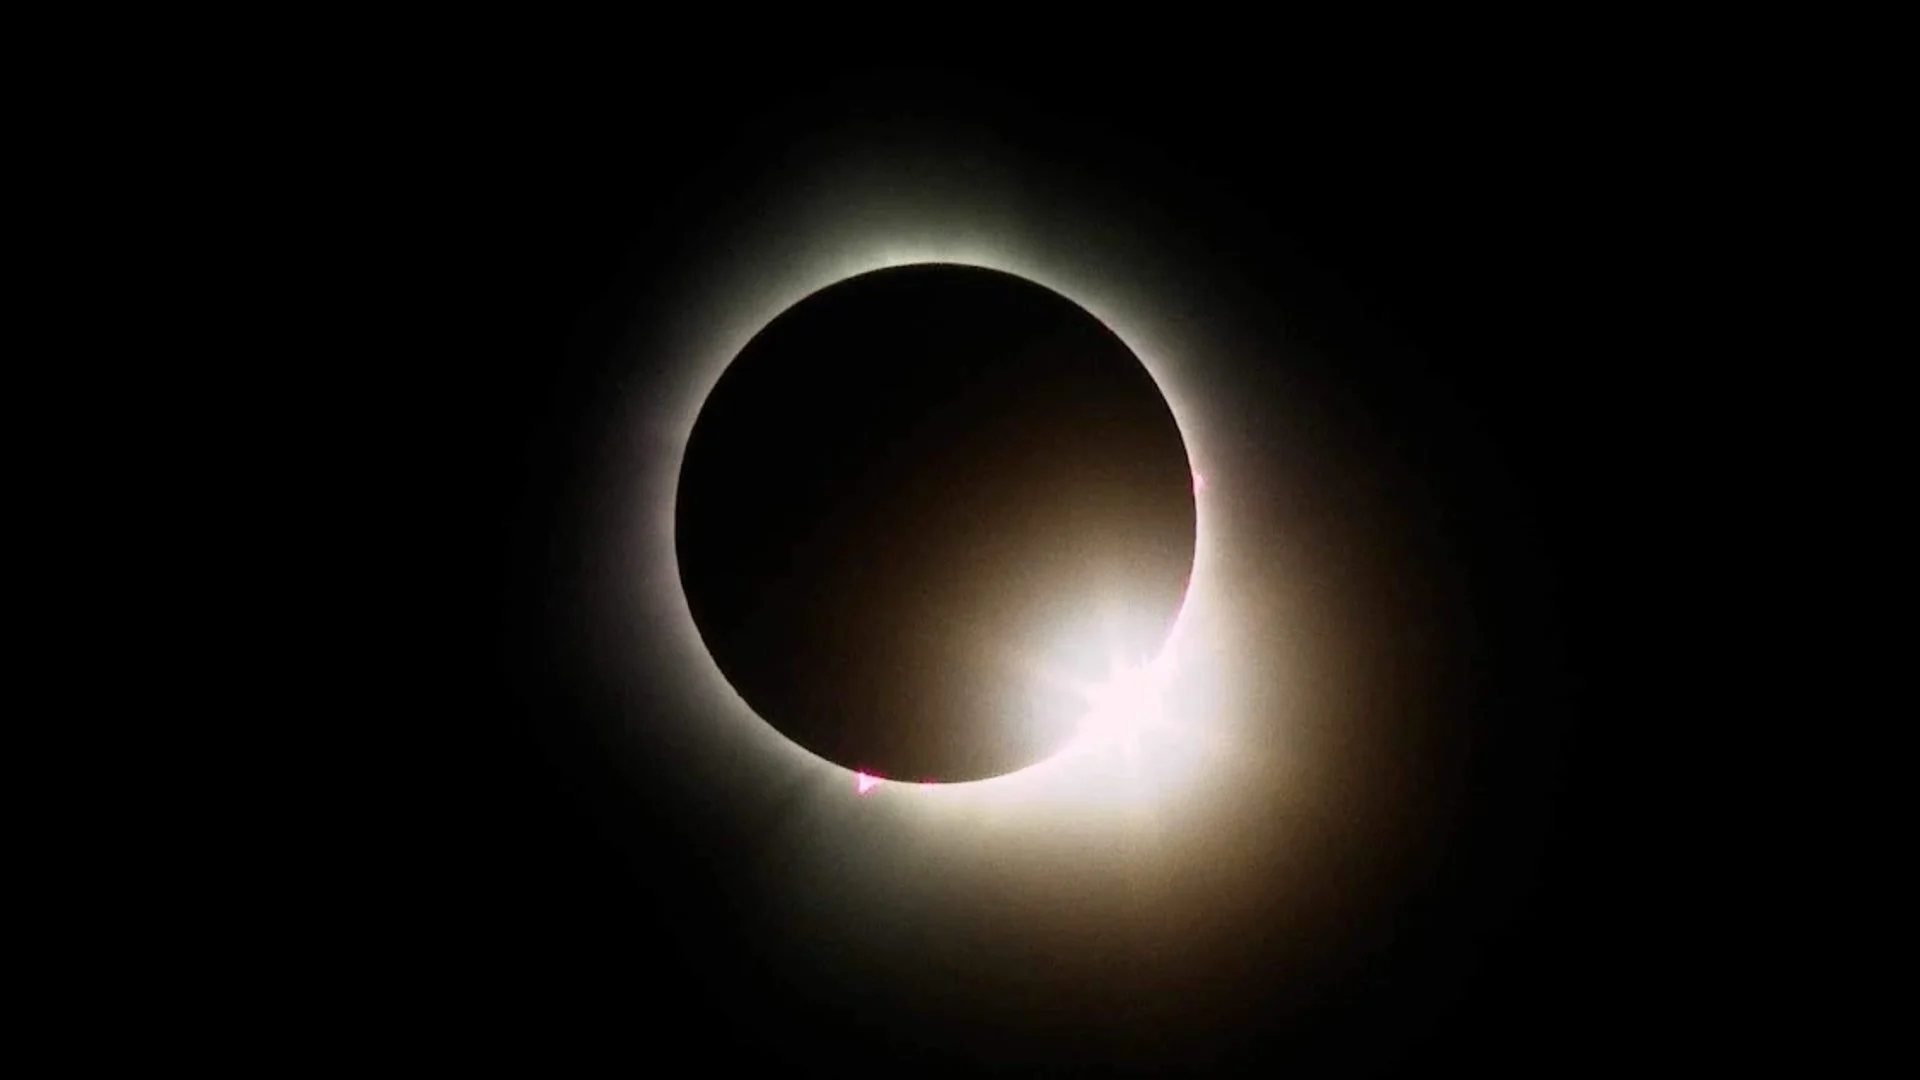 April 8 was the weirdest weather day, thanks to the solar eclipse